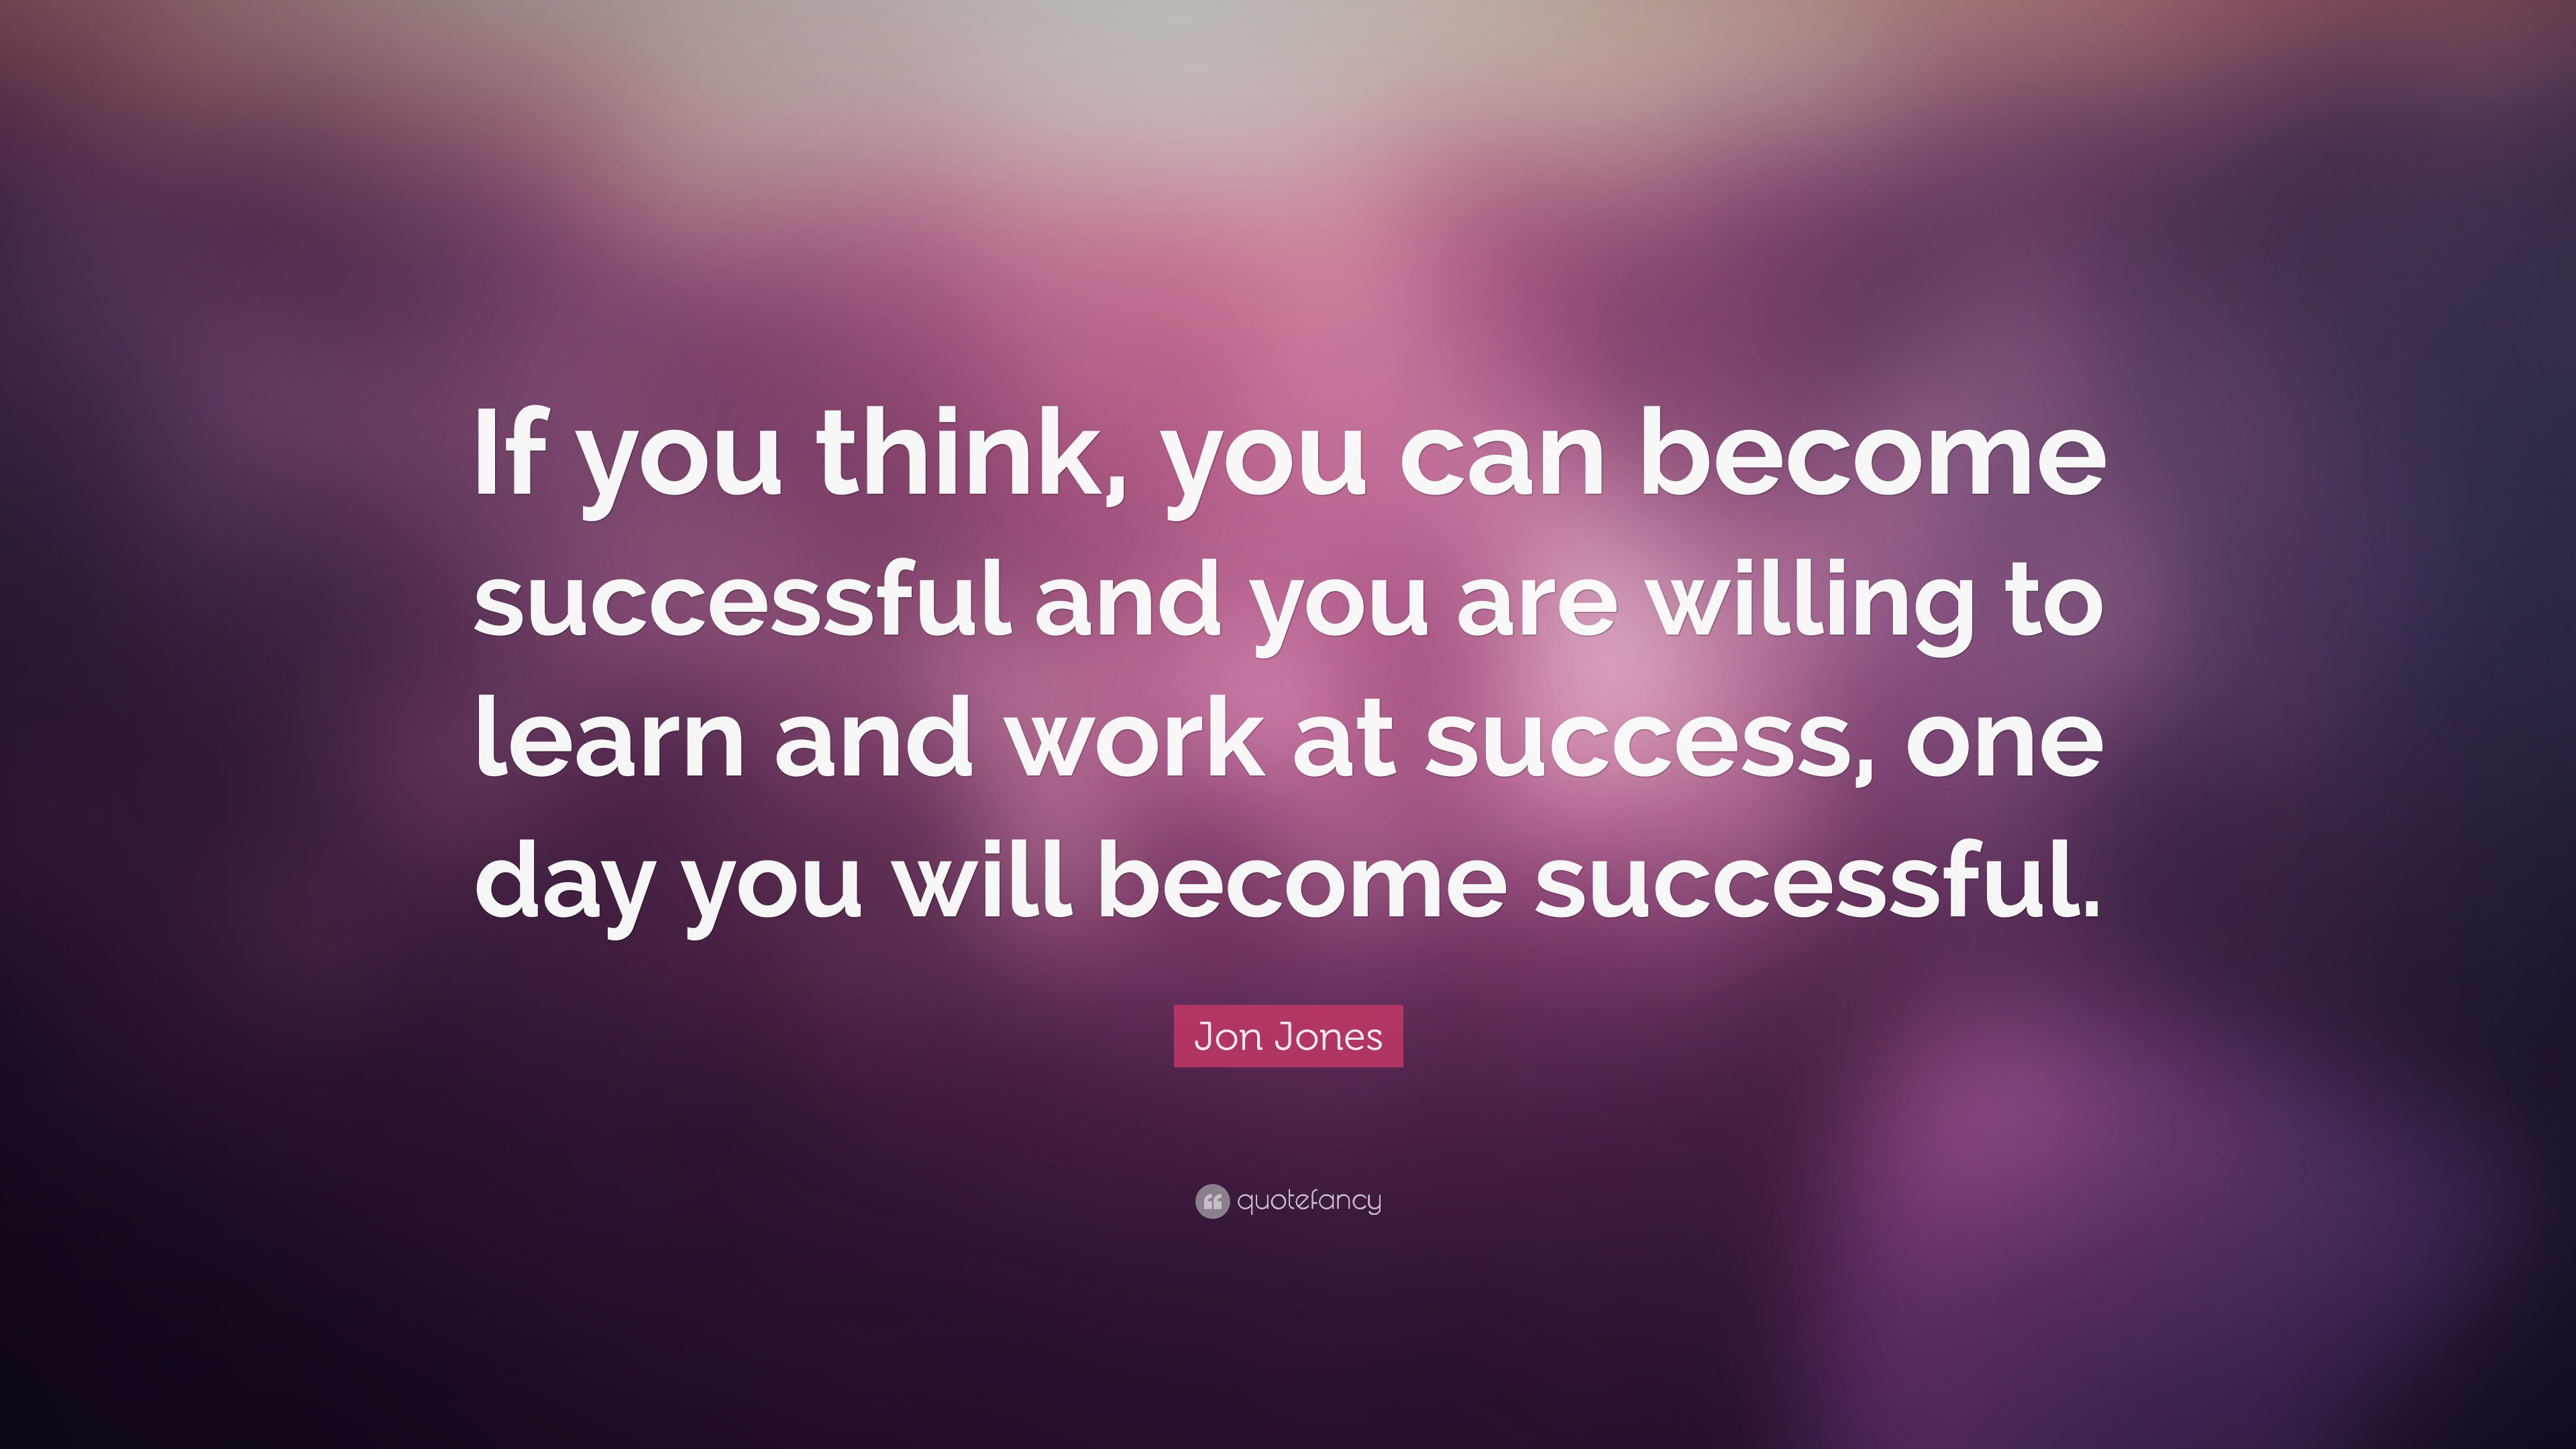 Jon Jones Quote: “If you think, you can become successful and you are ...